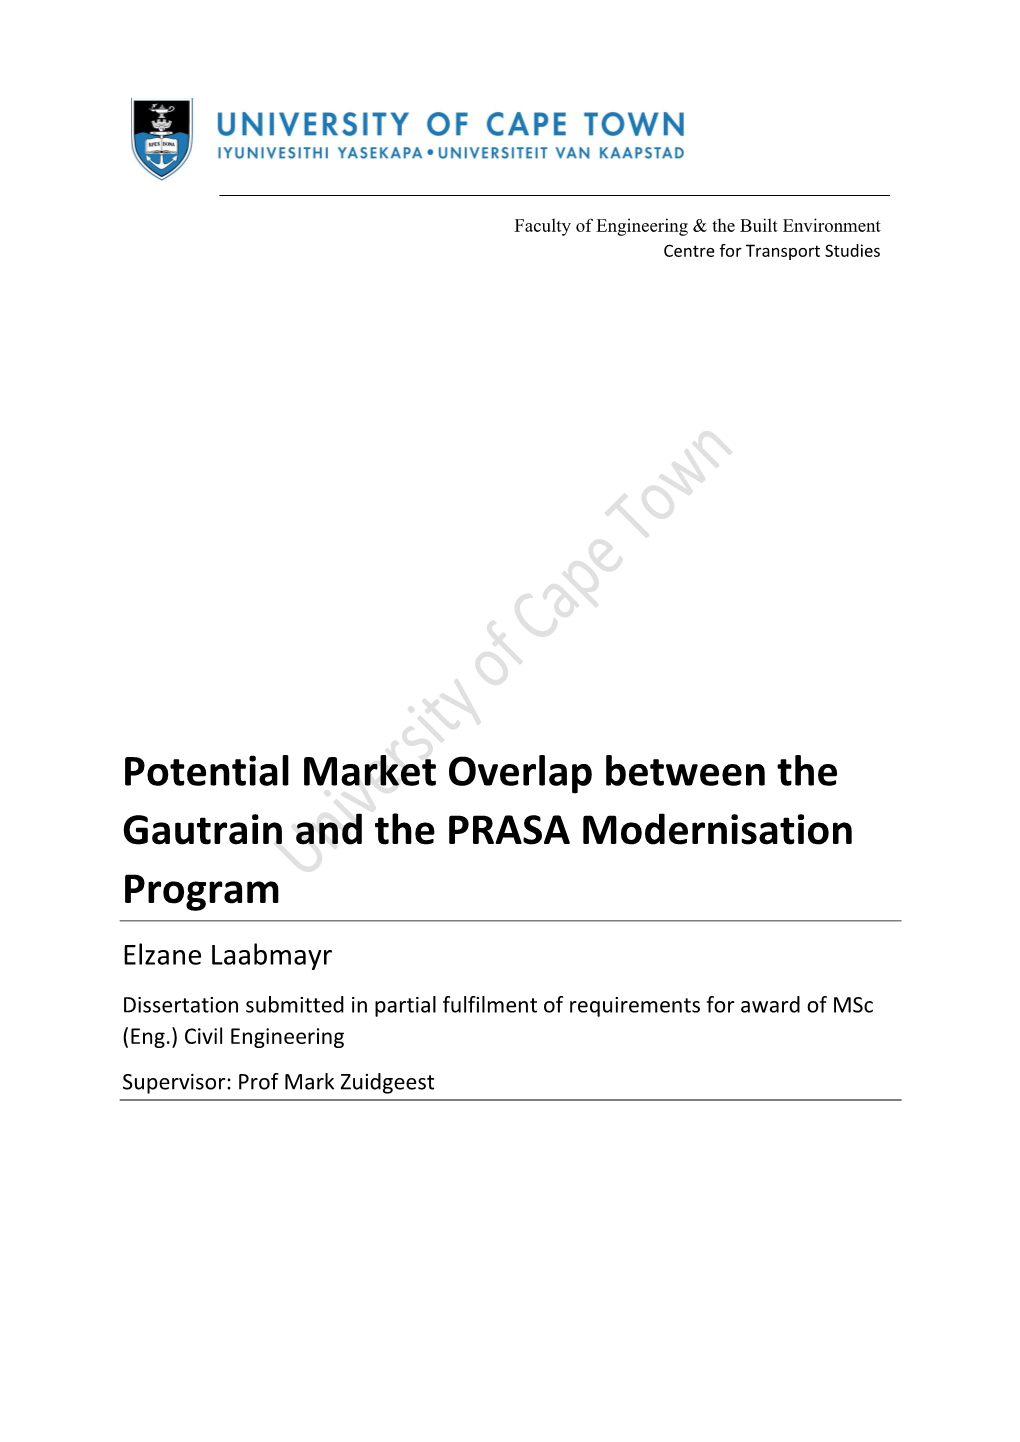 Potential Market Overlap Between the Gautrain and the PRASA Modernisation